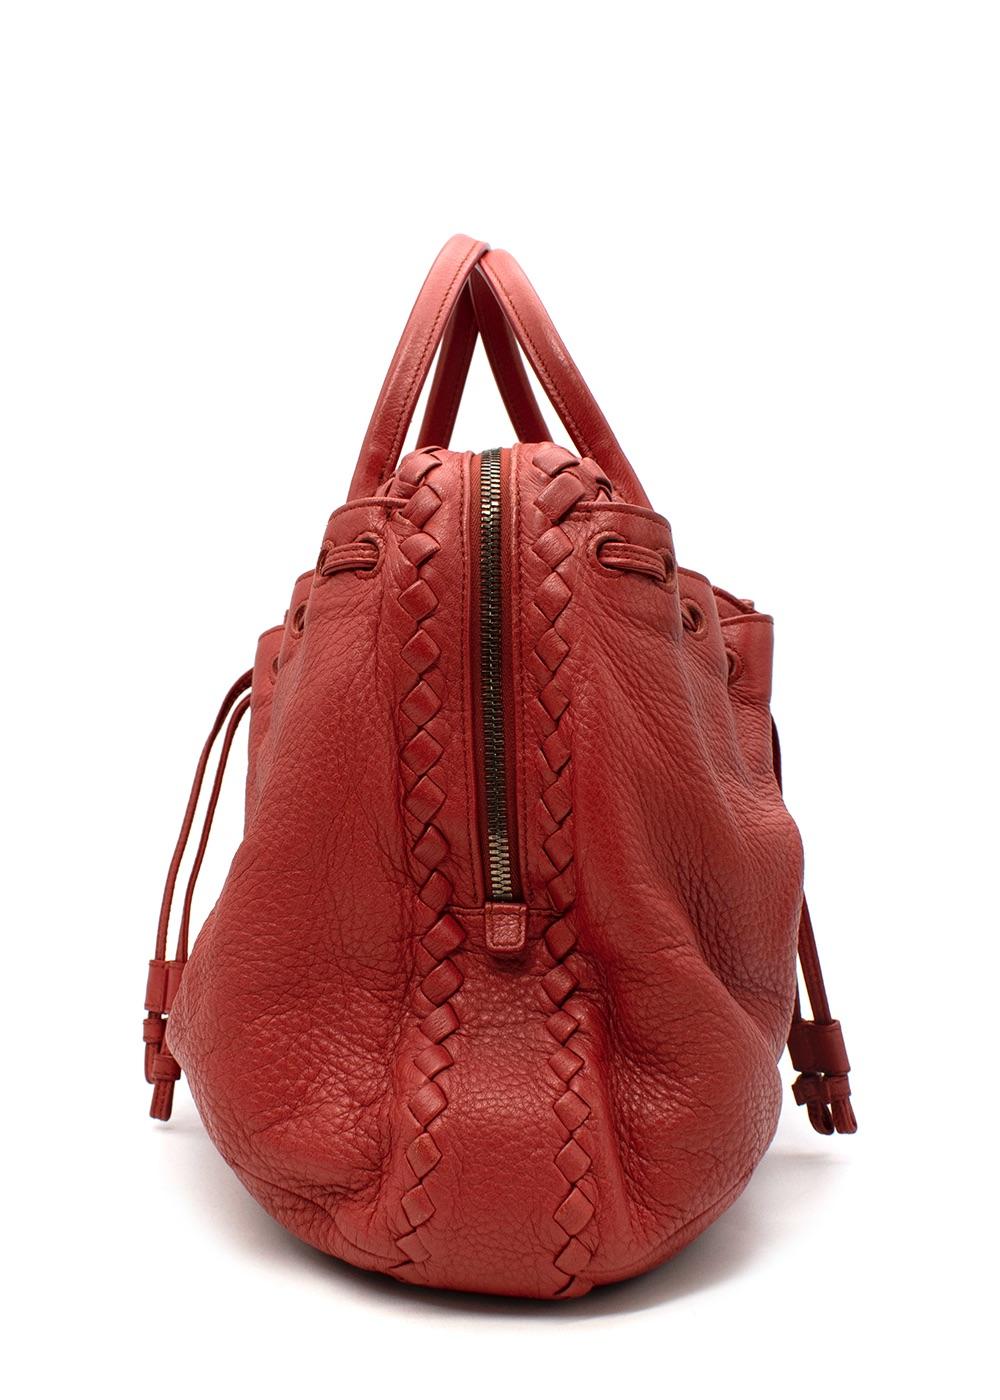 Bottega Veneta Red Leather Intrecciato Bag

- Signature woven Intrecciato red leather panel at the top of the bag 
- Gathered, drawstring body
- Suede interior 

Materials:
Leather
Suede 

Made in Italy 

PLEASE NOTE, THESE ITEMS ARE PRE-OWNED AND